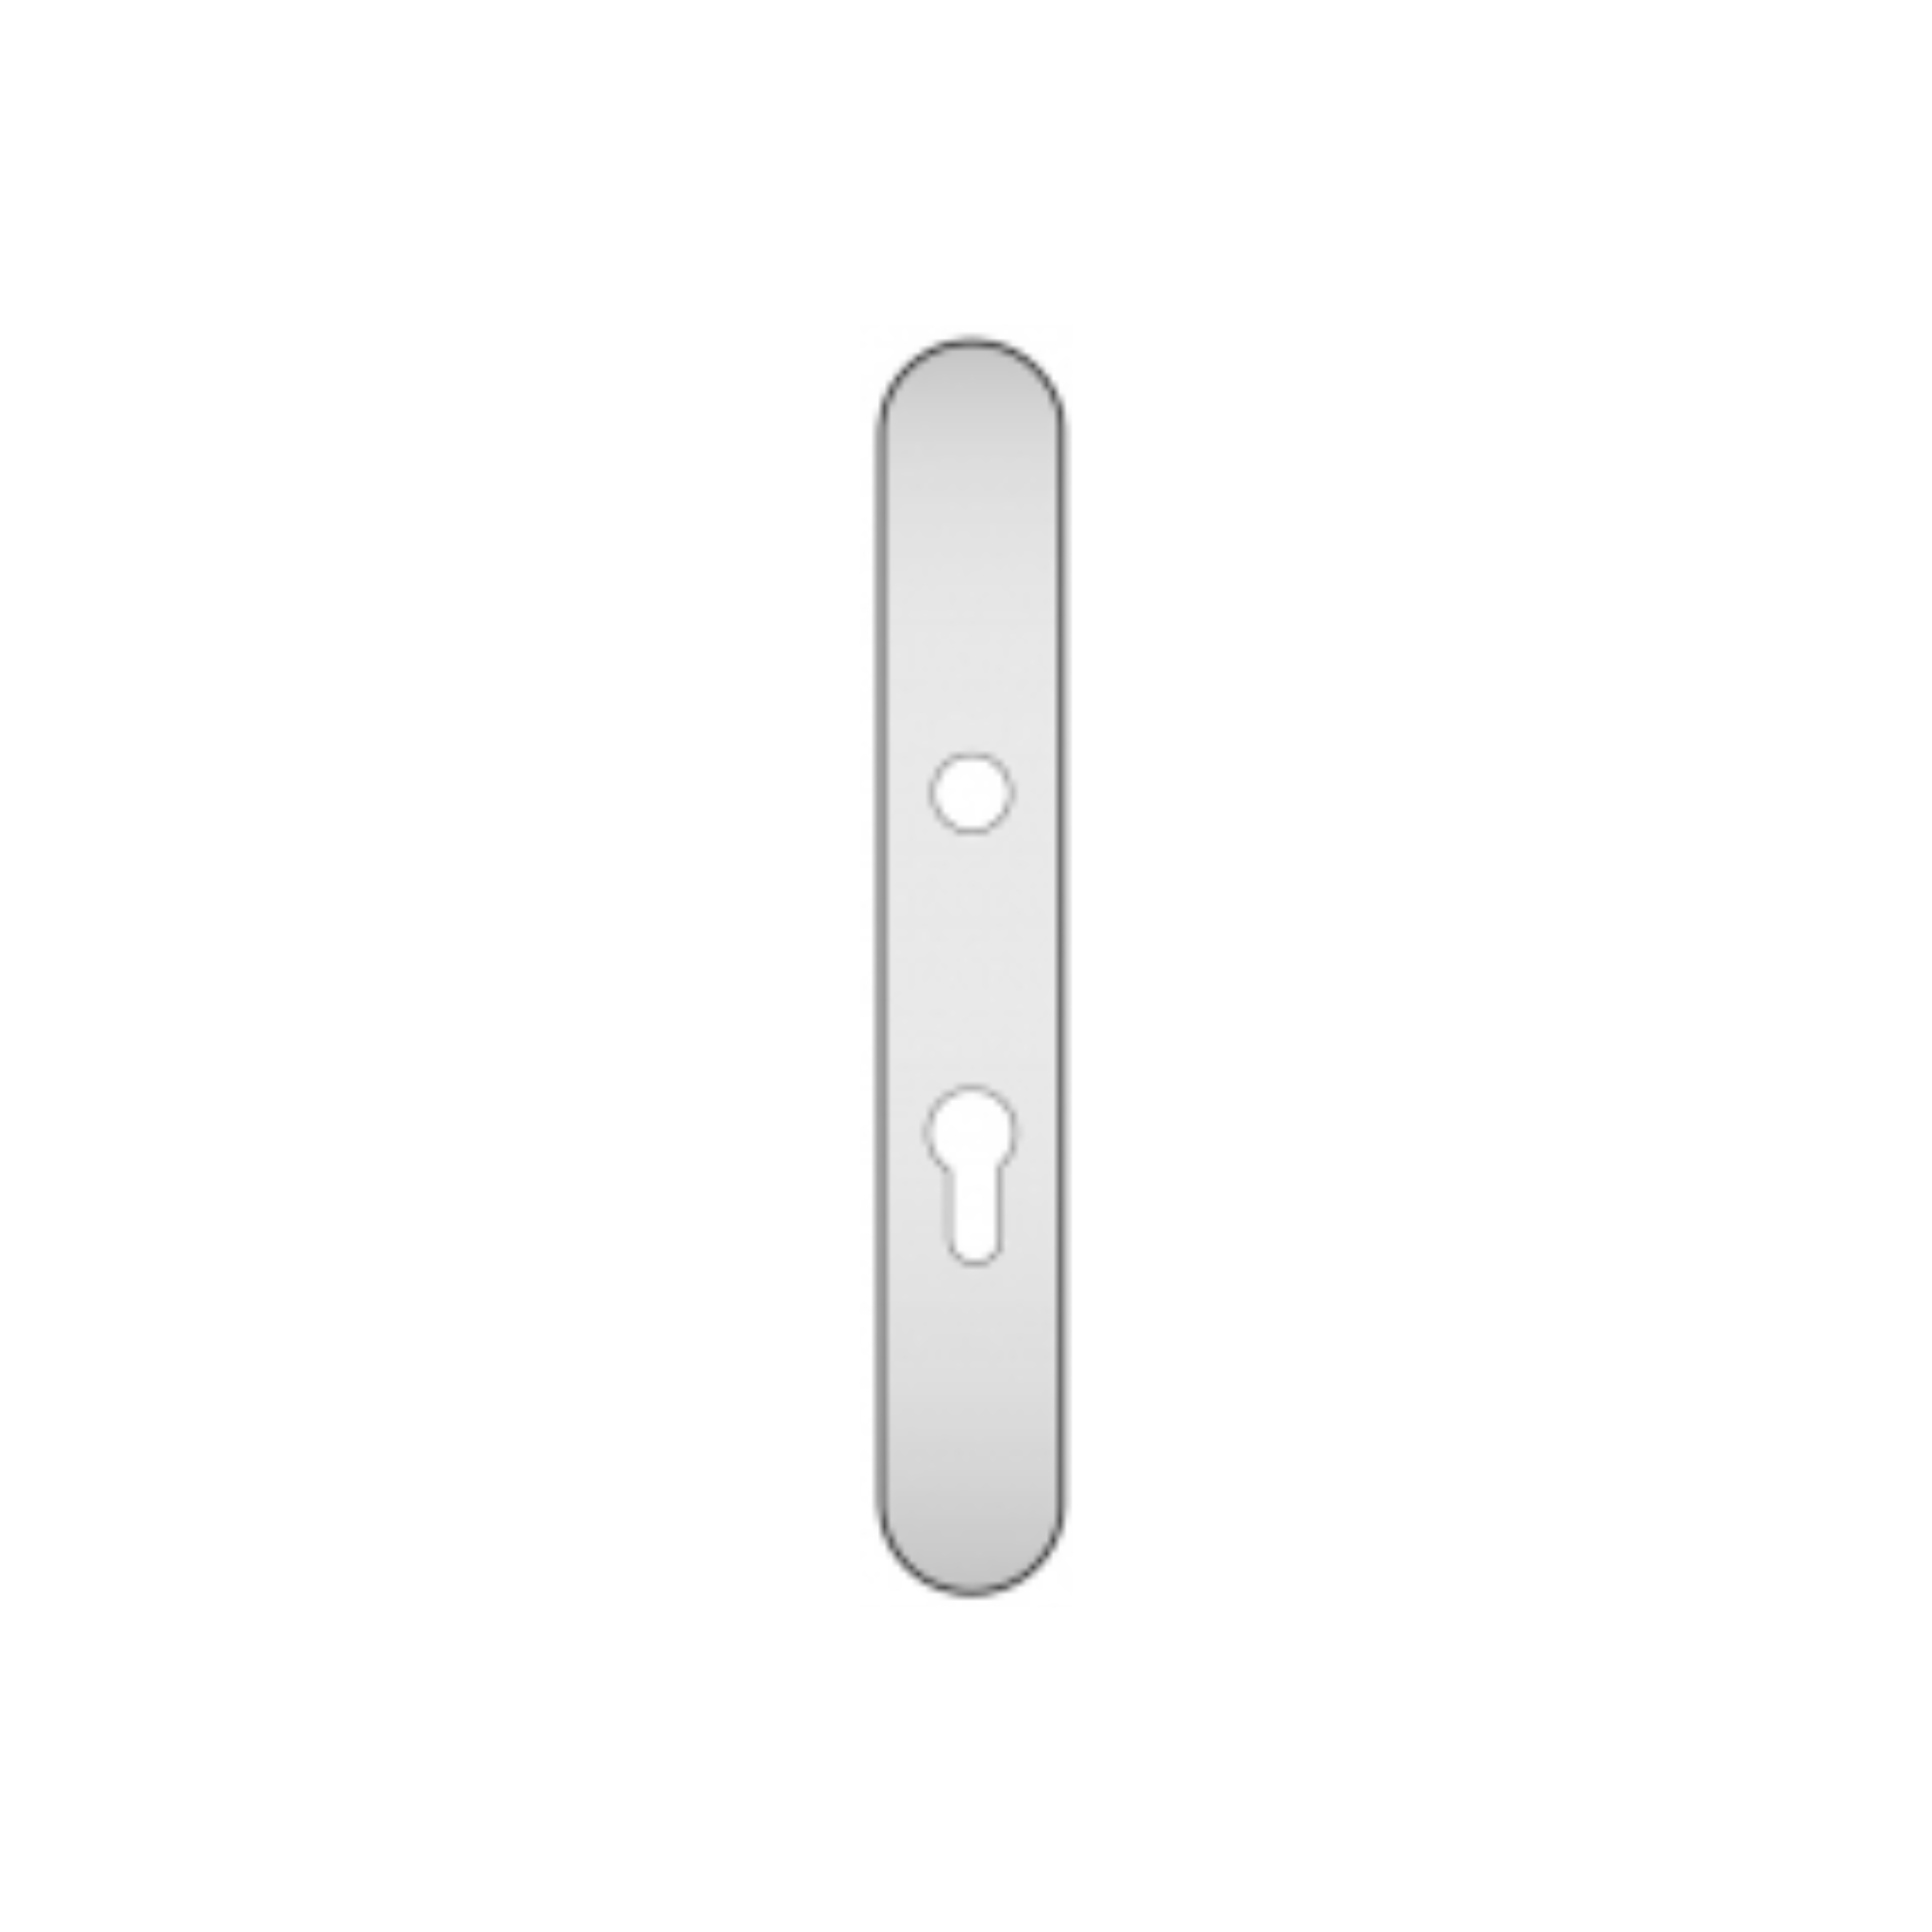 QS4483 CYL, Plate, Narrow Oval, 245mm (l) x 36mm (w), Supplied with QS Handle, Stainless Steel, QS